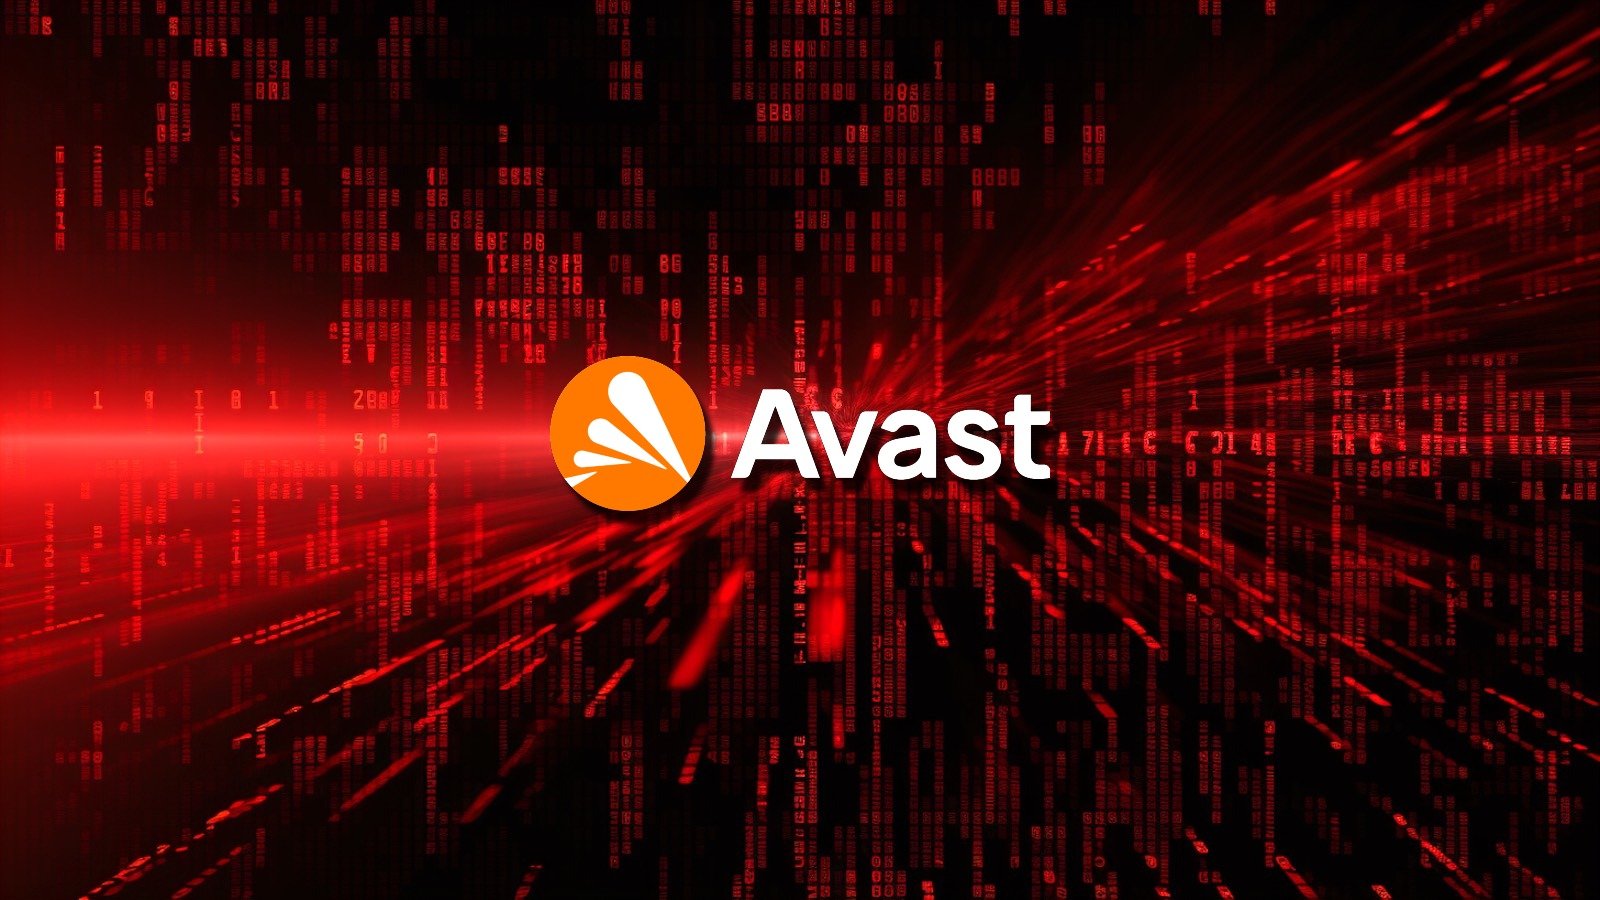 FTC to ban Avast from selling browsing data for advertising purposes